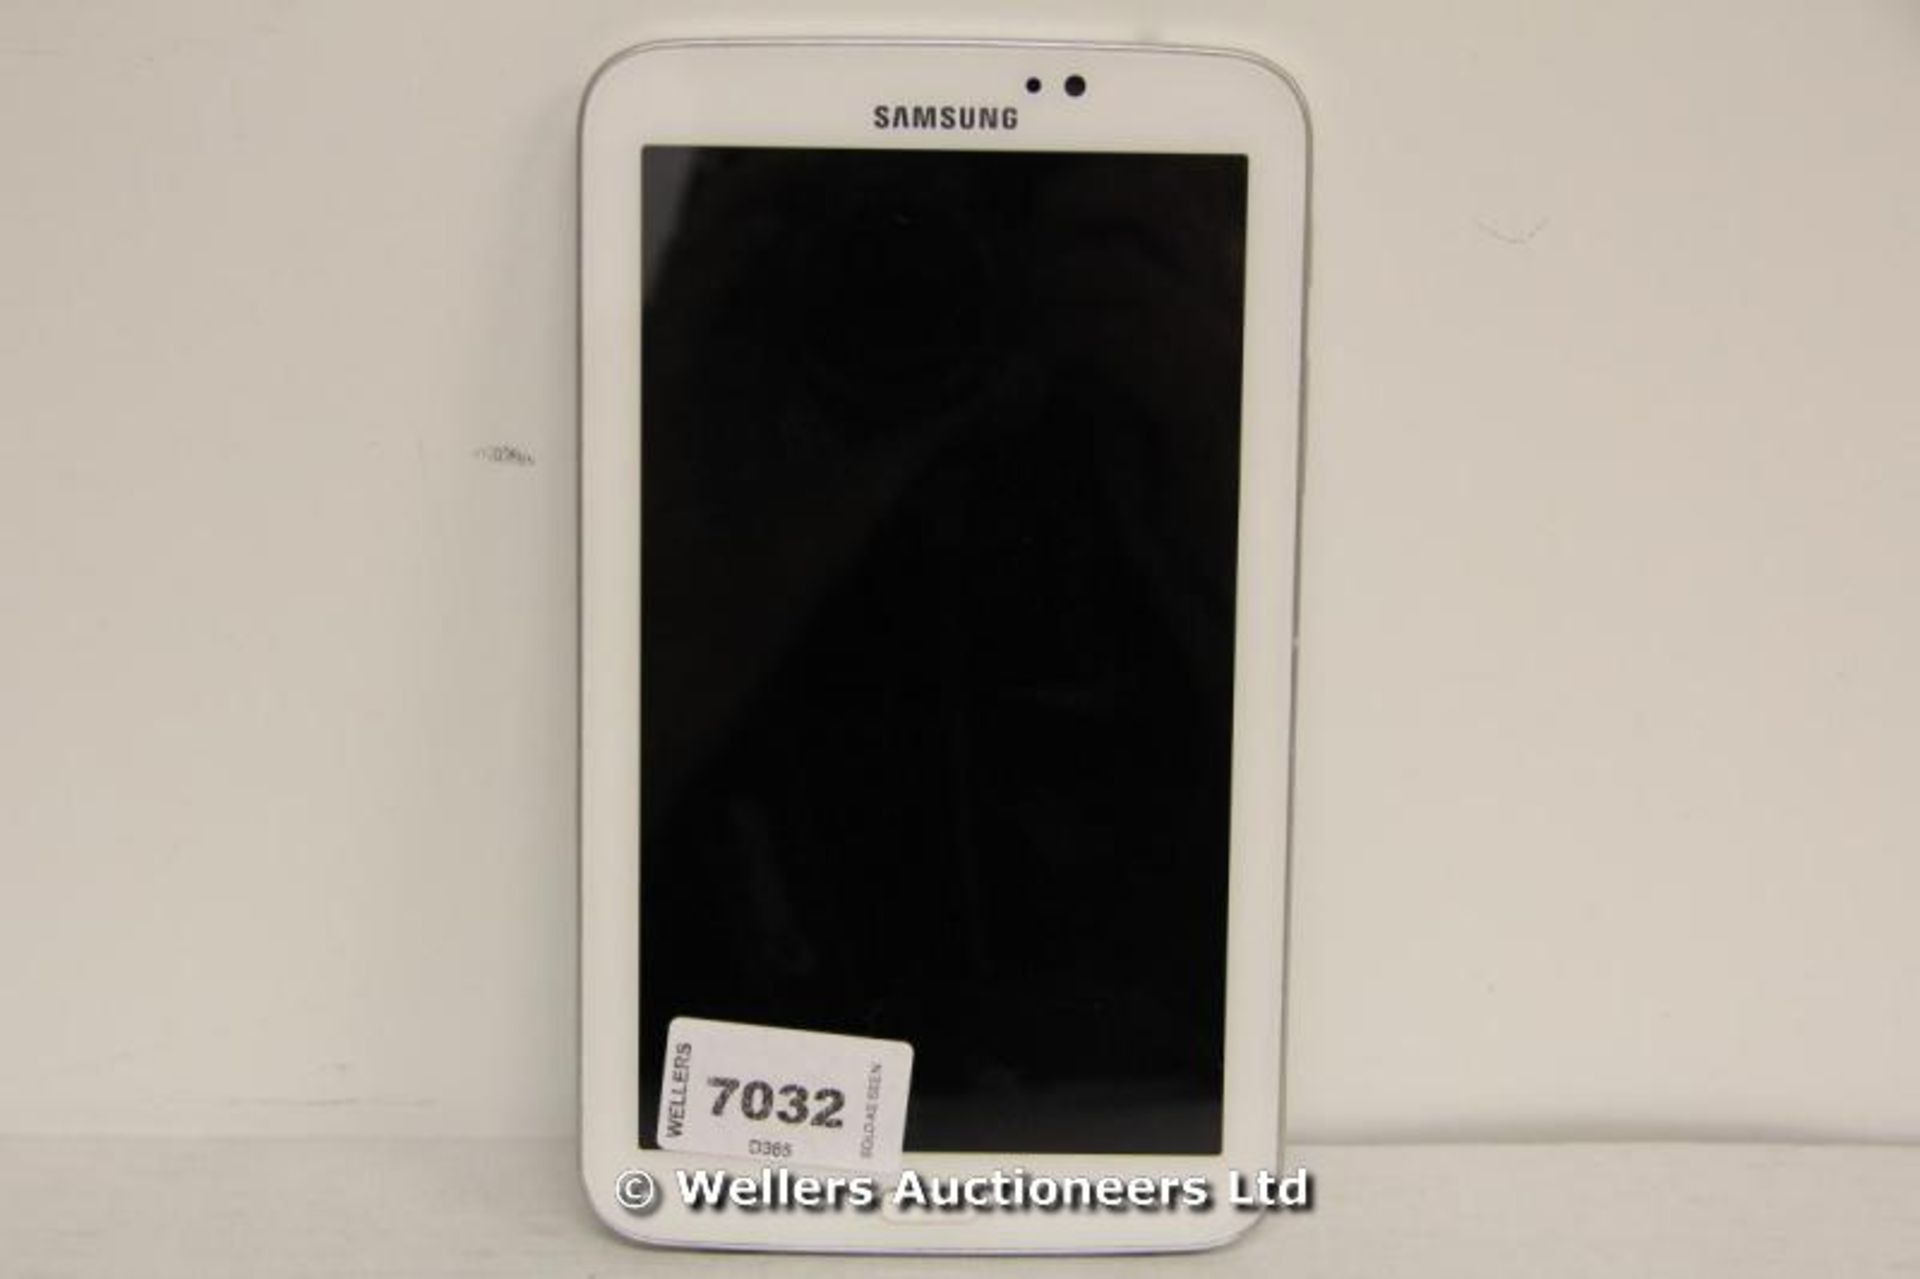 *"SAMSUNG TAB 3 7” TABLET / 1.2GHZ DUAL CORE PROCESSOR / RAM 1GB / 8GB HDD / ANDROID O/S / WITH